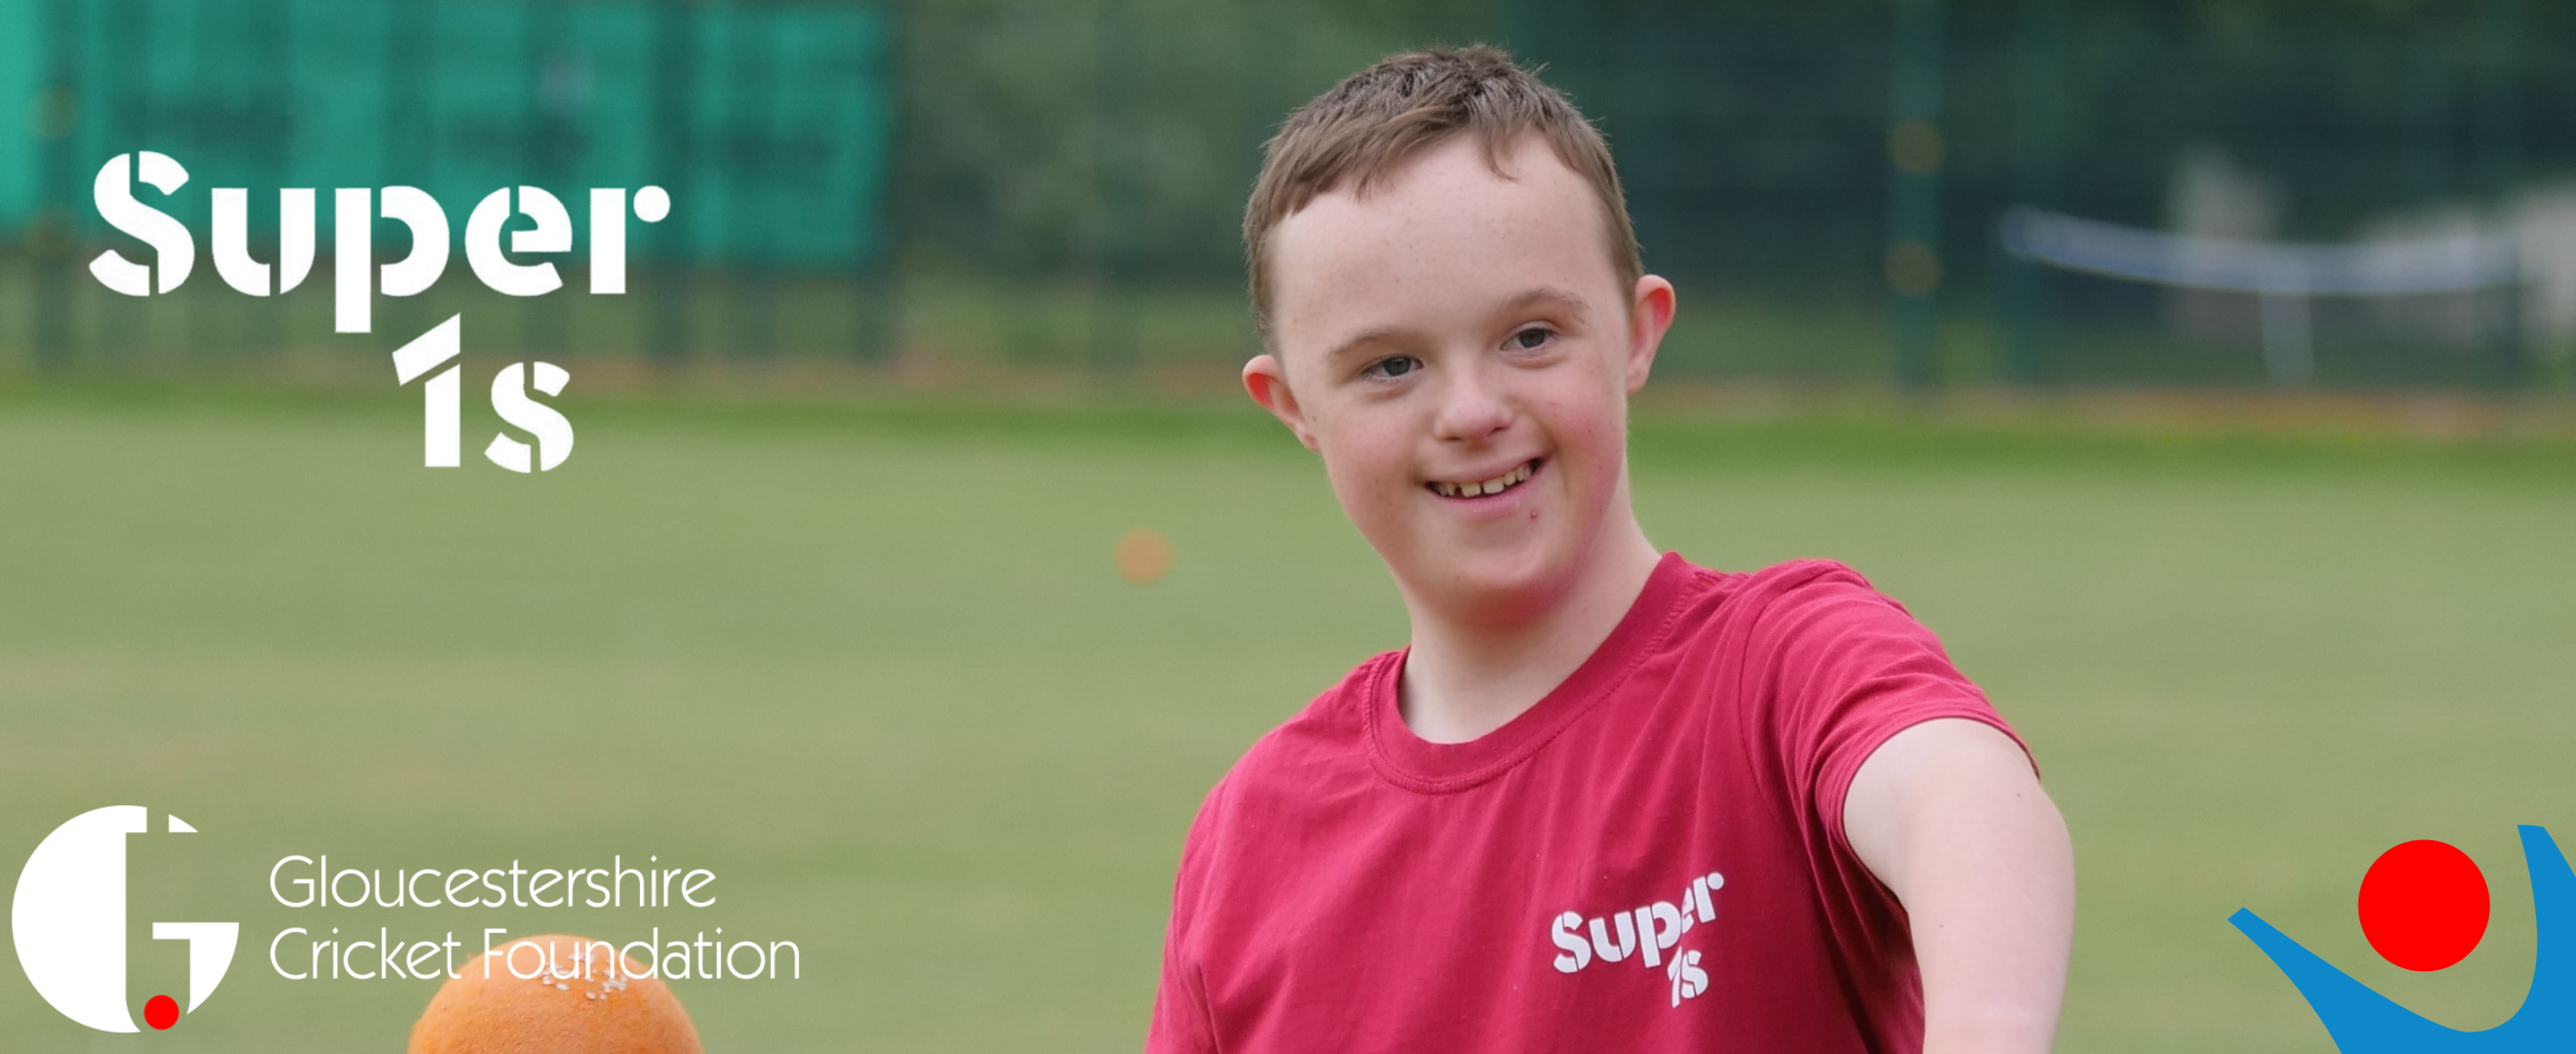 Picture showing young adult in red t-shirt, holding orange cricket ball. Super1s and Gloucestershire Cricket Foundation logos in corners